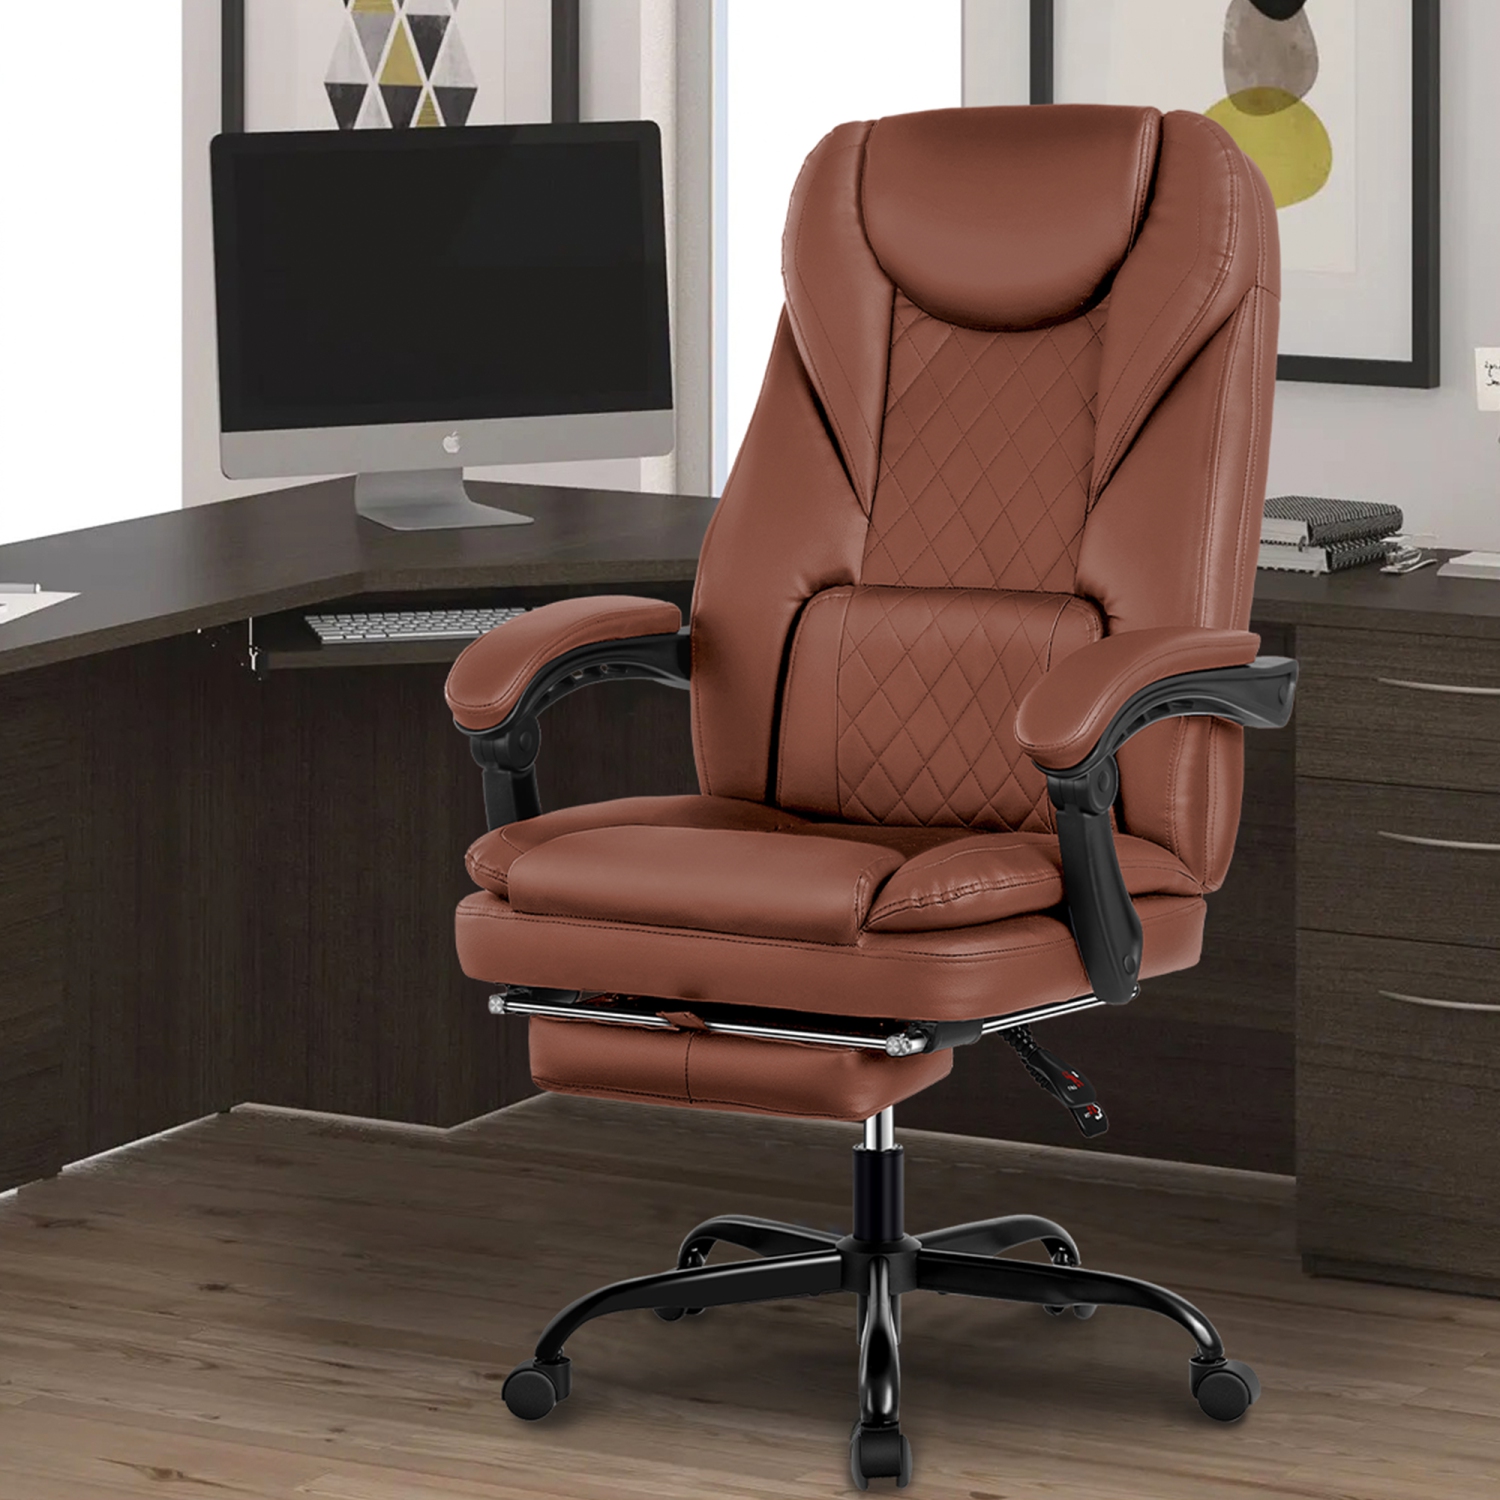 Executive Office Chair, Leather Chair, Big and Tall Office Chair